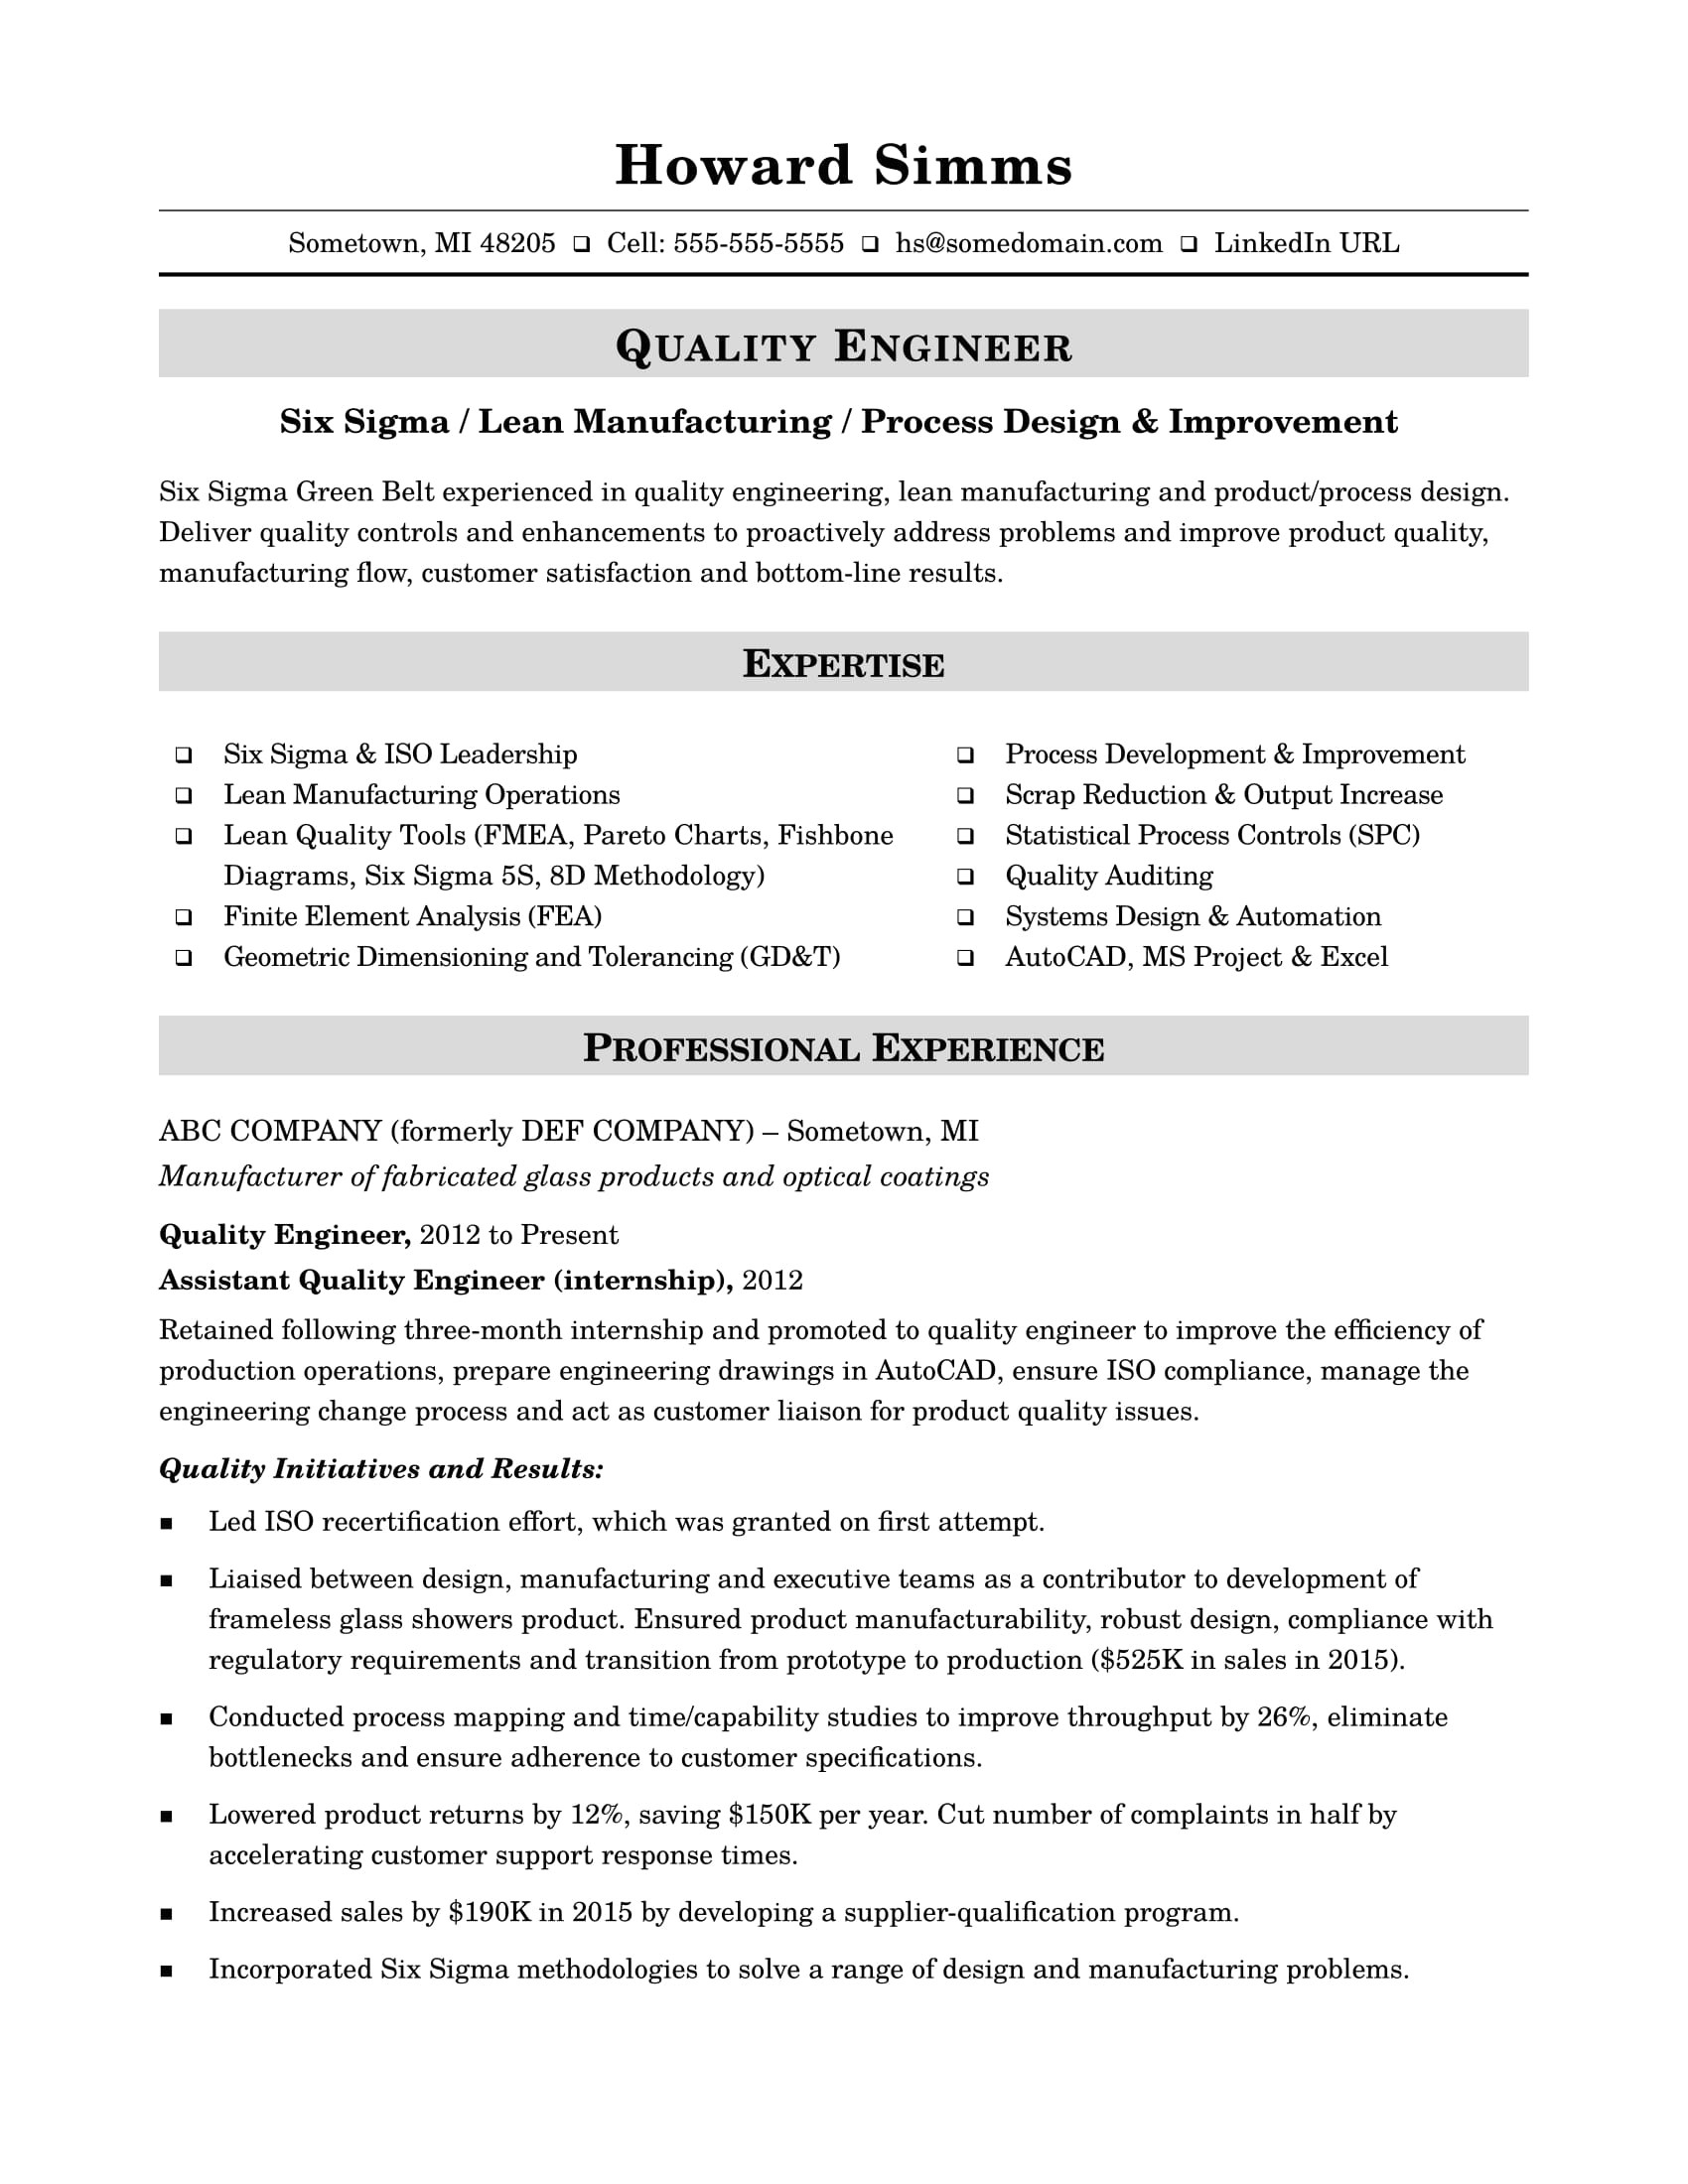 Engineer Resume Qualities Sample Resume for A Midlevel Quality Engineer Monster Com